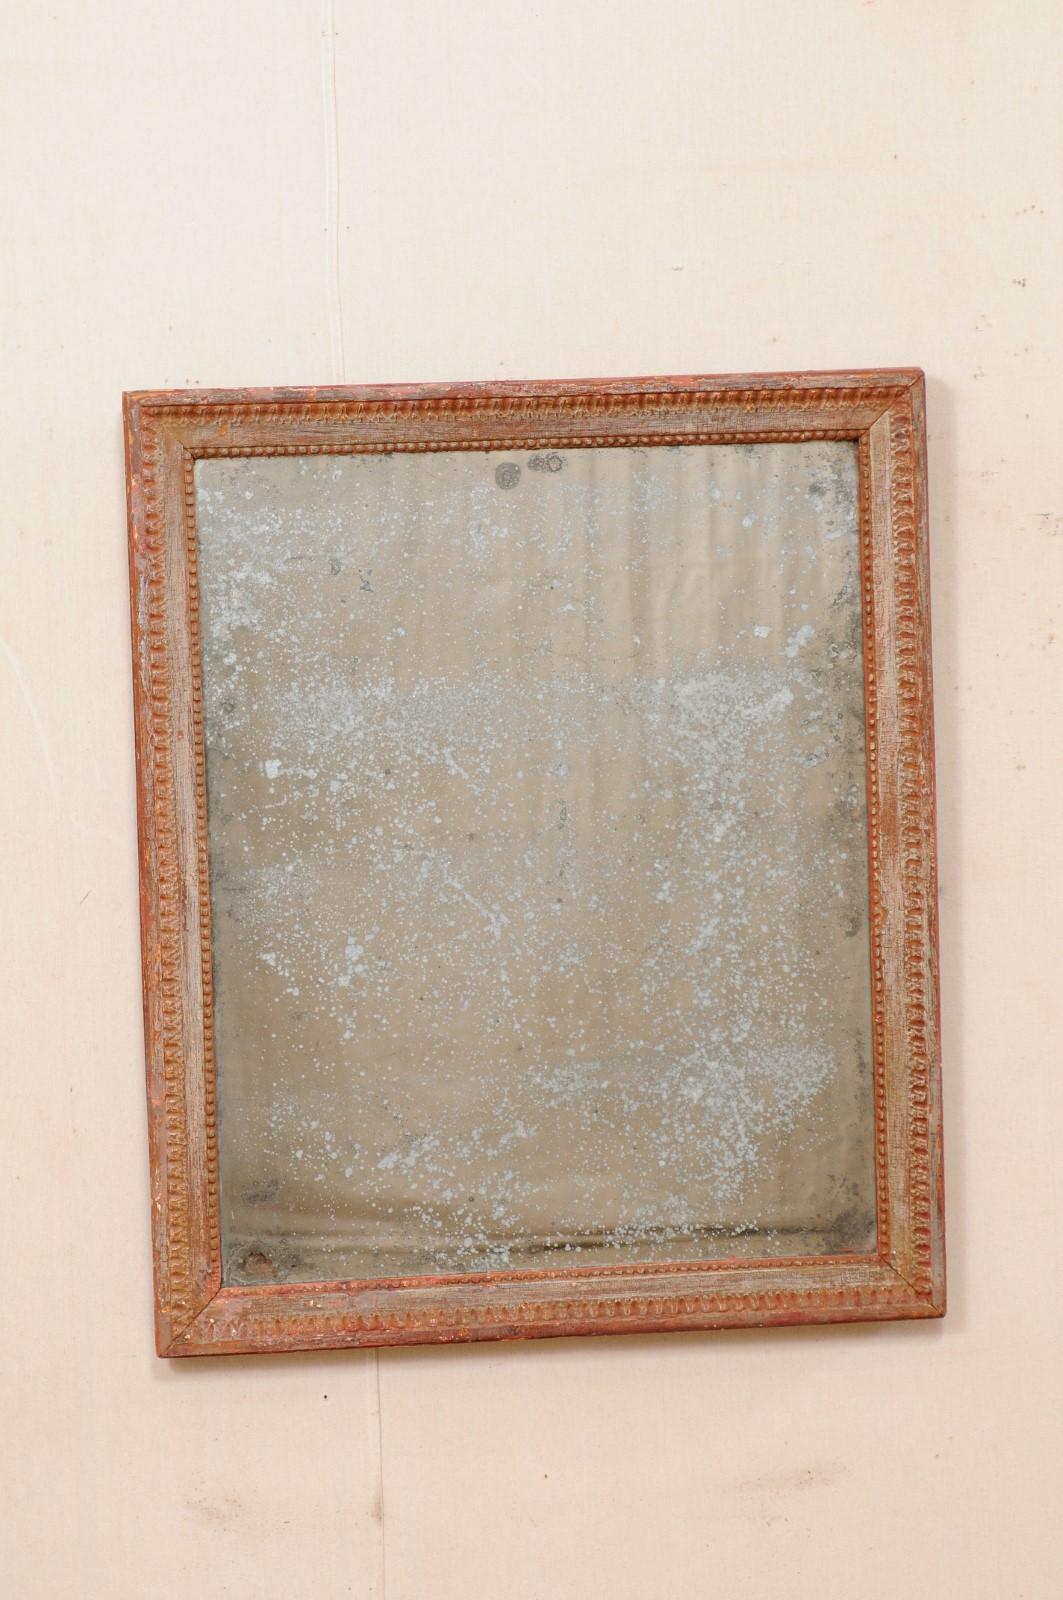 A French carved and painted wood wall mirror from the early 19th century. This antique mirror from France features a molded wood frame, which is nicely carved with decorative trim and petite raised beading along the inner surround. The piece has a